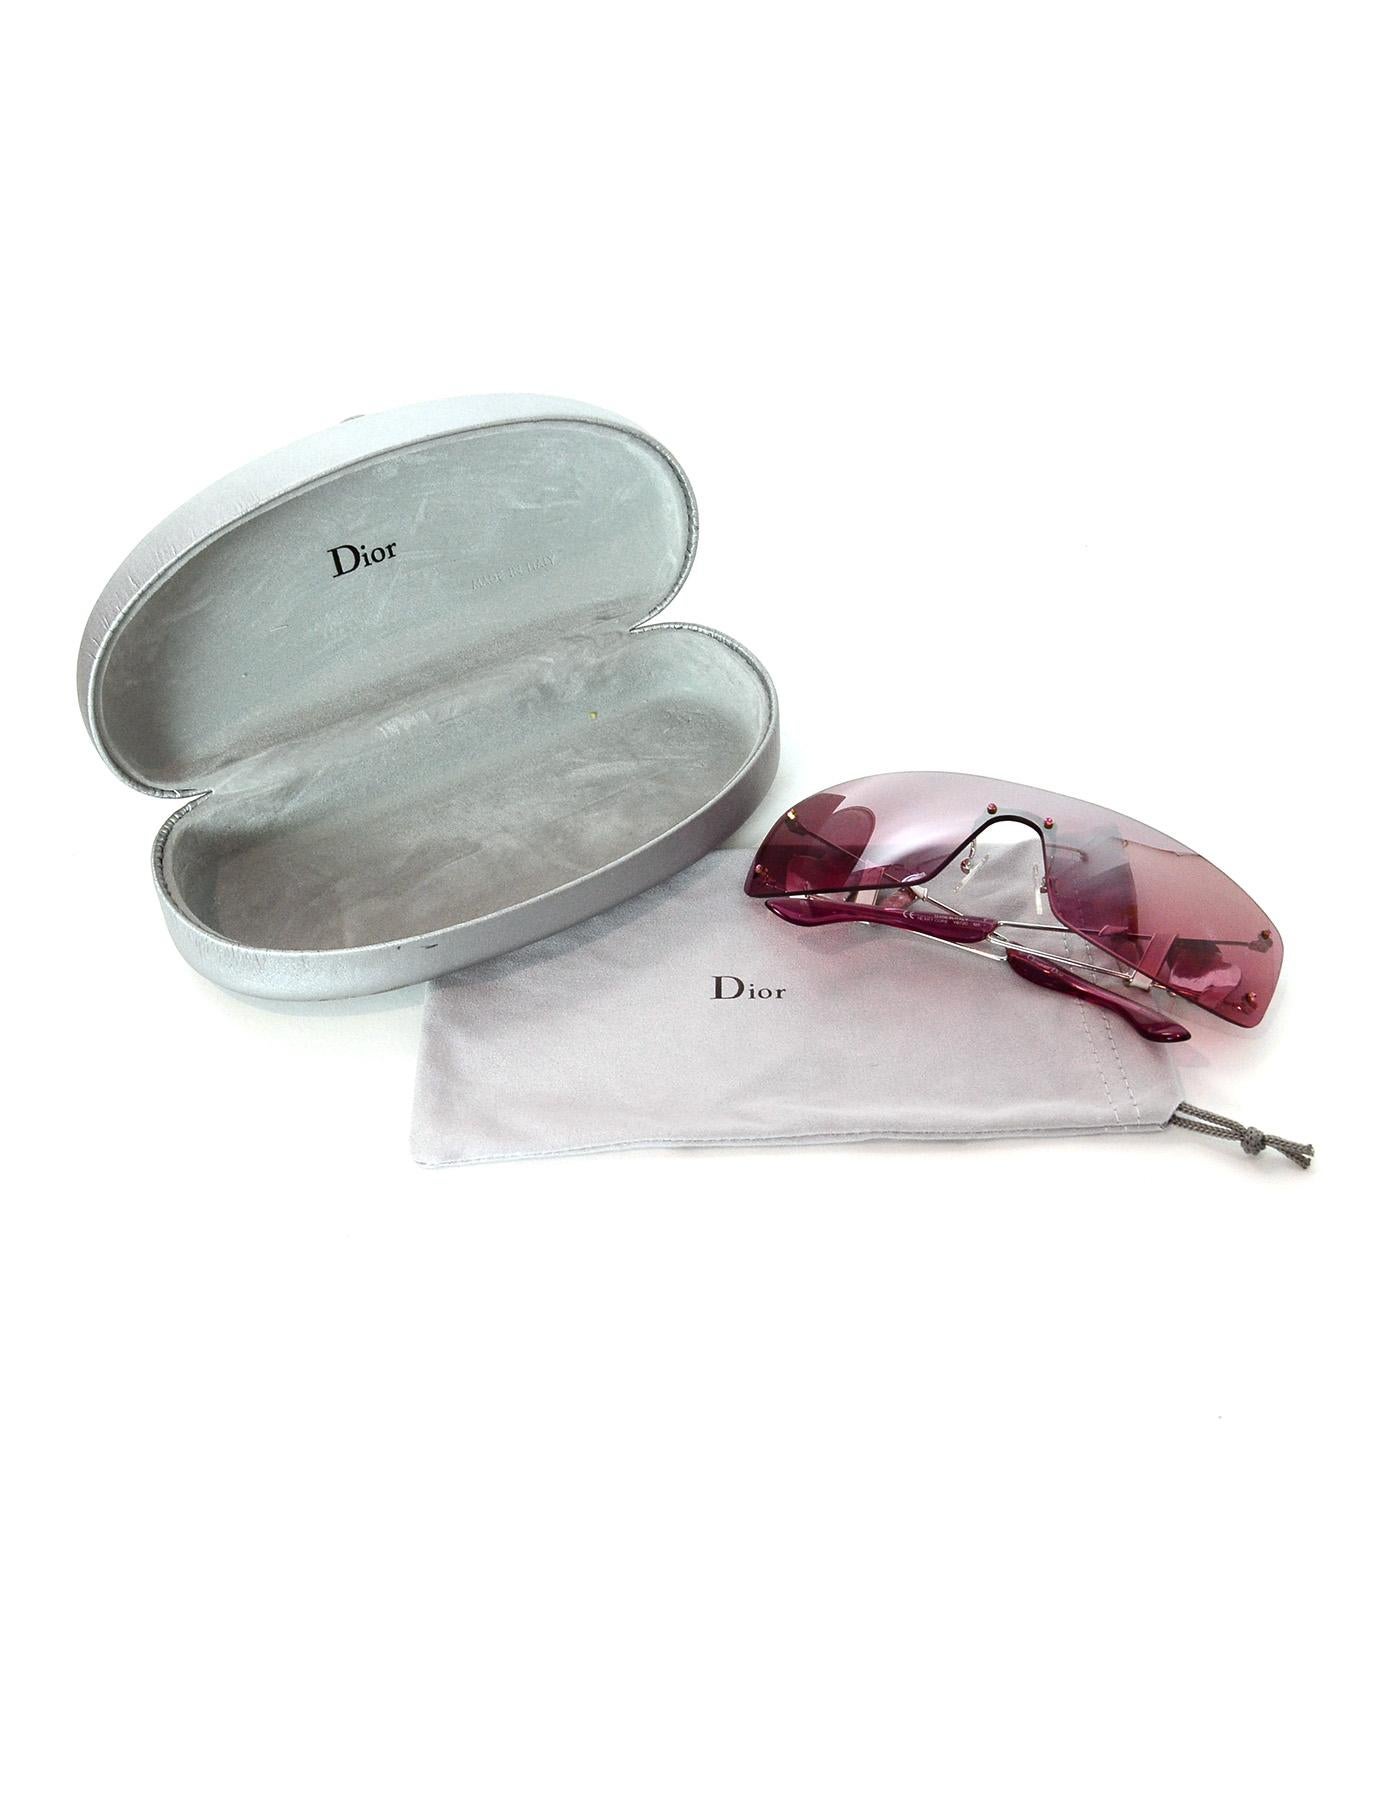 Dior Pink Heart Core Rimless Shield Sunglasses W/ Rhinestone Logo Arm

Made In: Italy
Color: Pink, silvertone, and white
Hardware: Silvertone
Materials: Metal
Overall Condition: Excellent pre-owned condition
Includes: Dior case and